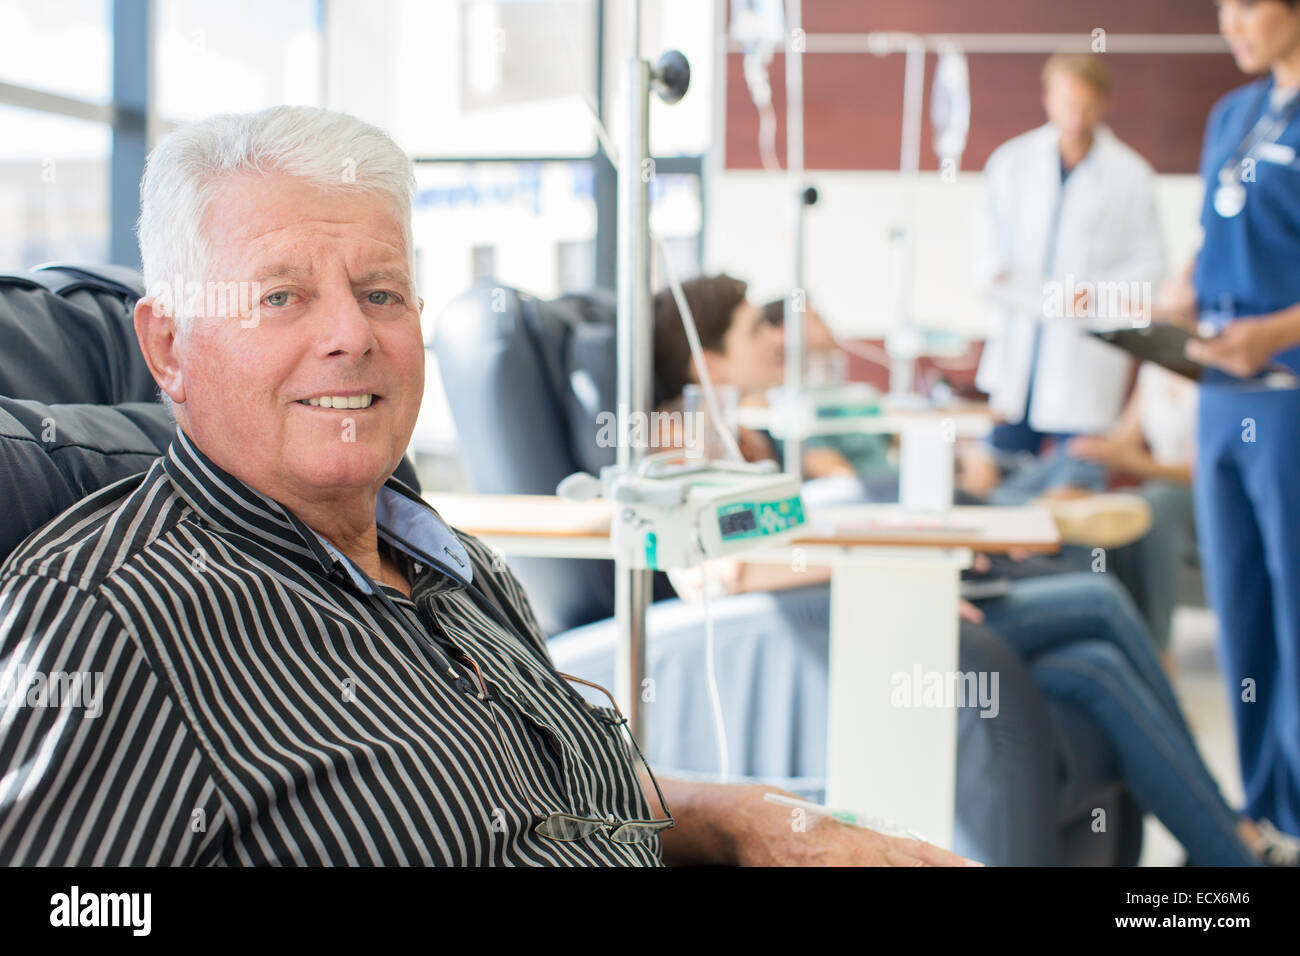 Smiling senior man undergoing medical treatment in outpatient clinic Stock Photo